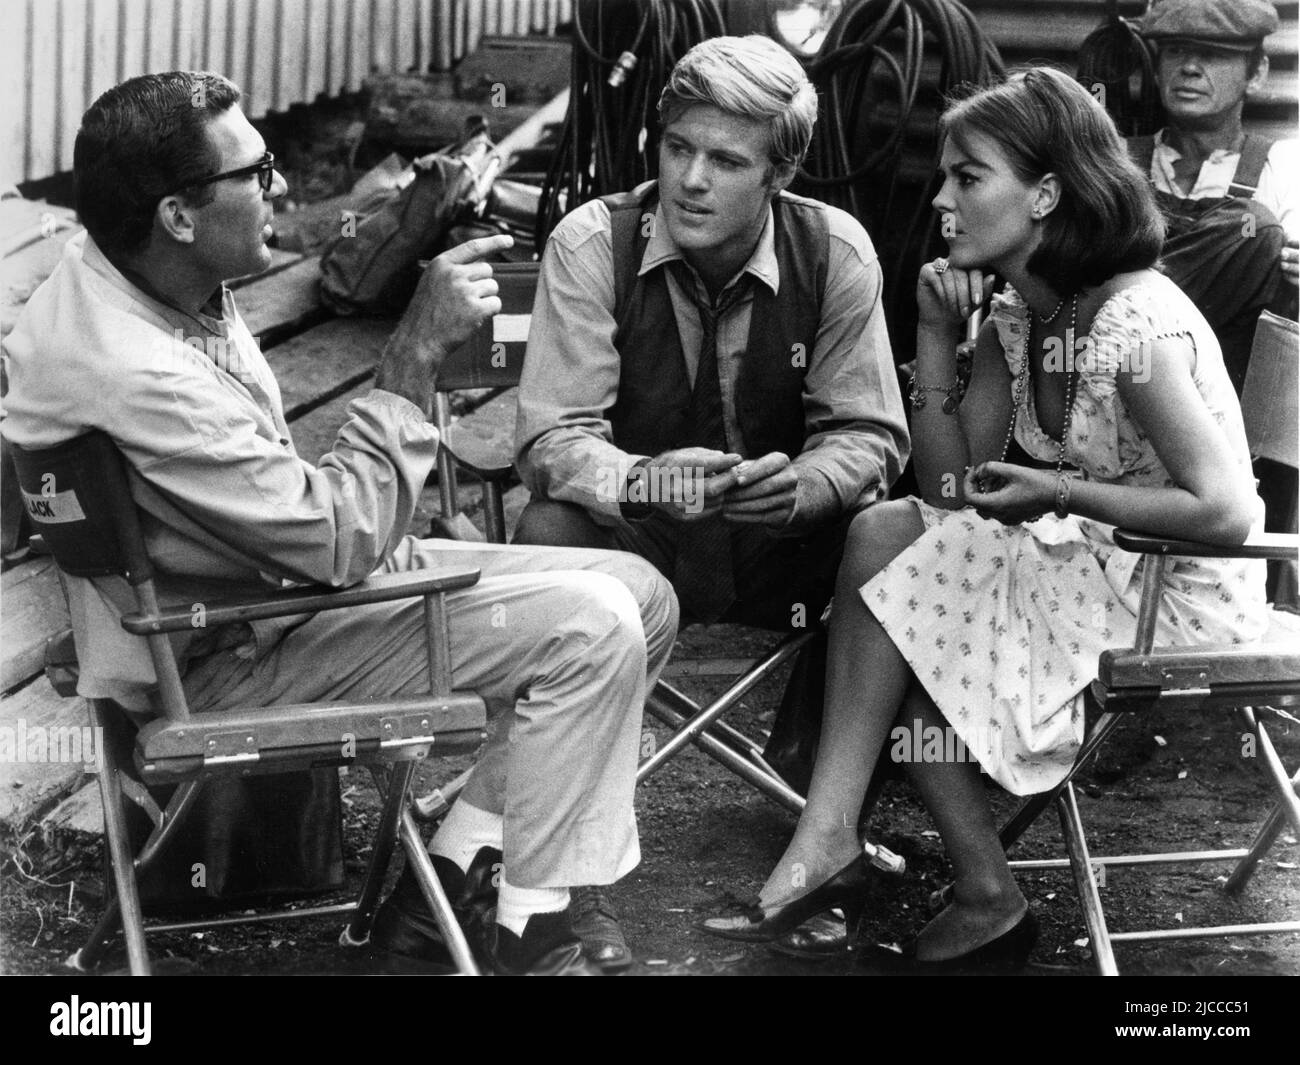 Director SYDNEY POLLACK ROBERT REDFORD NATALIE WOOD and CHARLES BRONSON on set location candid during filming of THIS PROPERTY IS CONDEMNED 1966 director SYDNEY POLLACK play Tennessee Williams screenplay Francis Ford Coppola Fred Coe and Edith Sommer costumes Edith Head Seven Arts Productions / Paramount Pictures Stock Photo